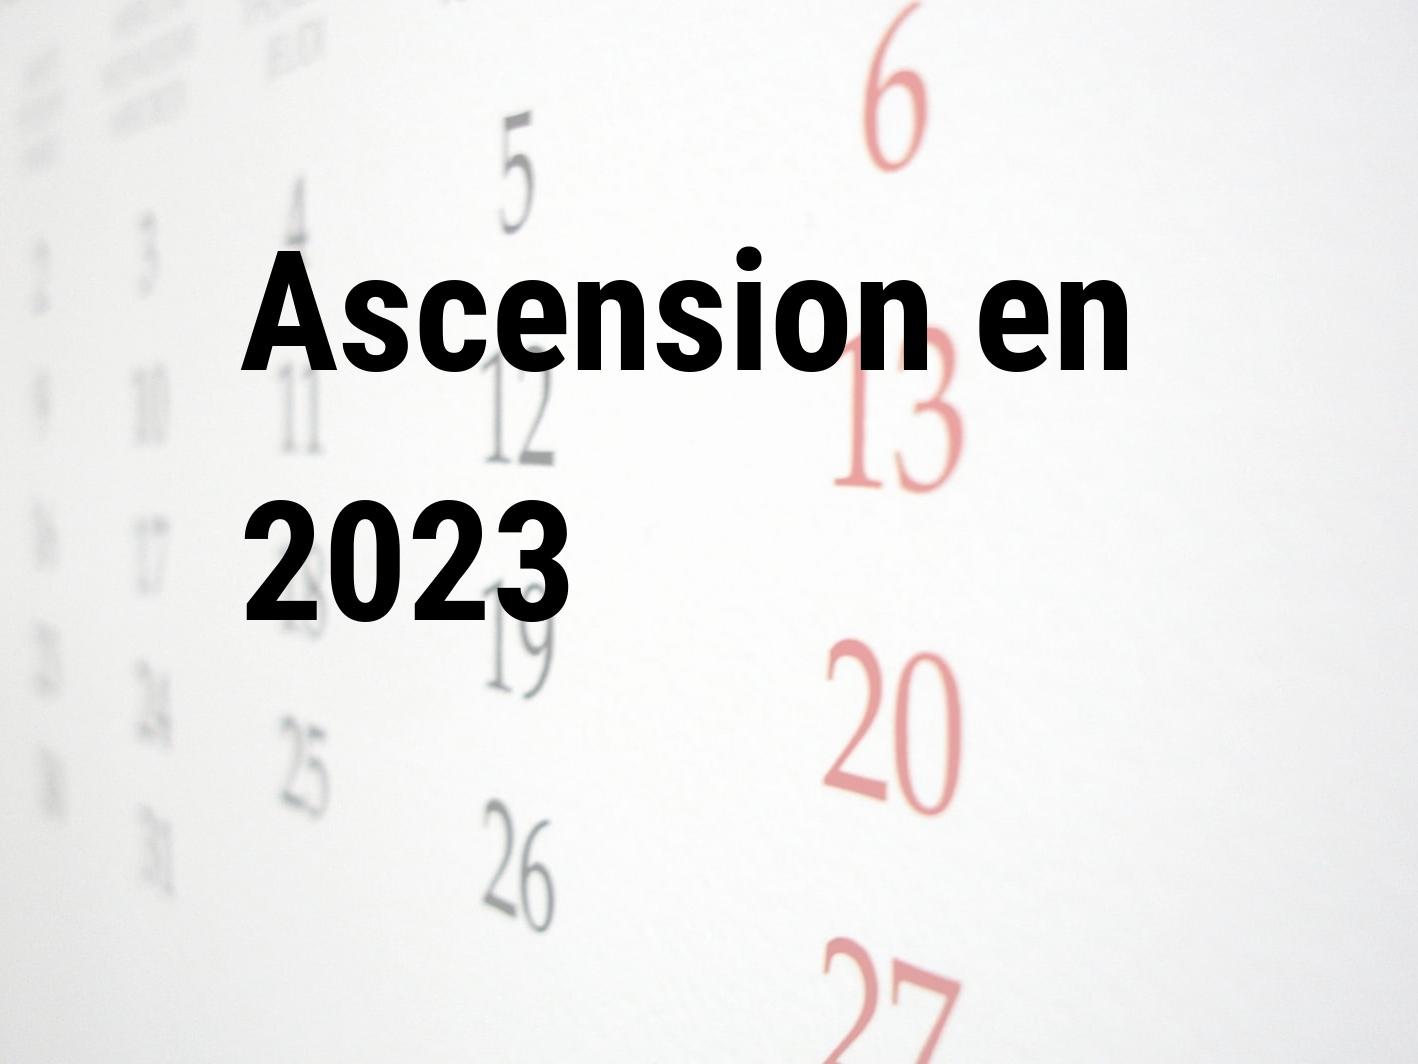 Ampimage.php?year=2023&country=fr&id=ascension&type=feast